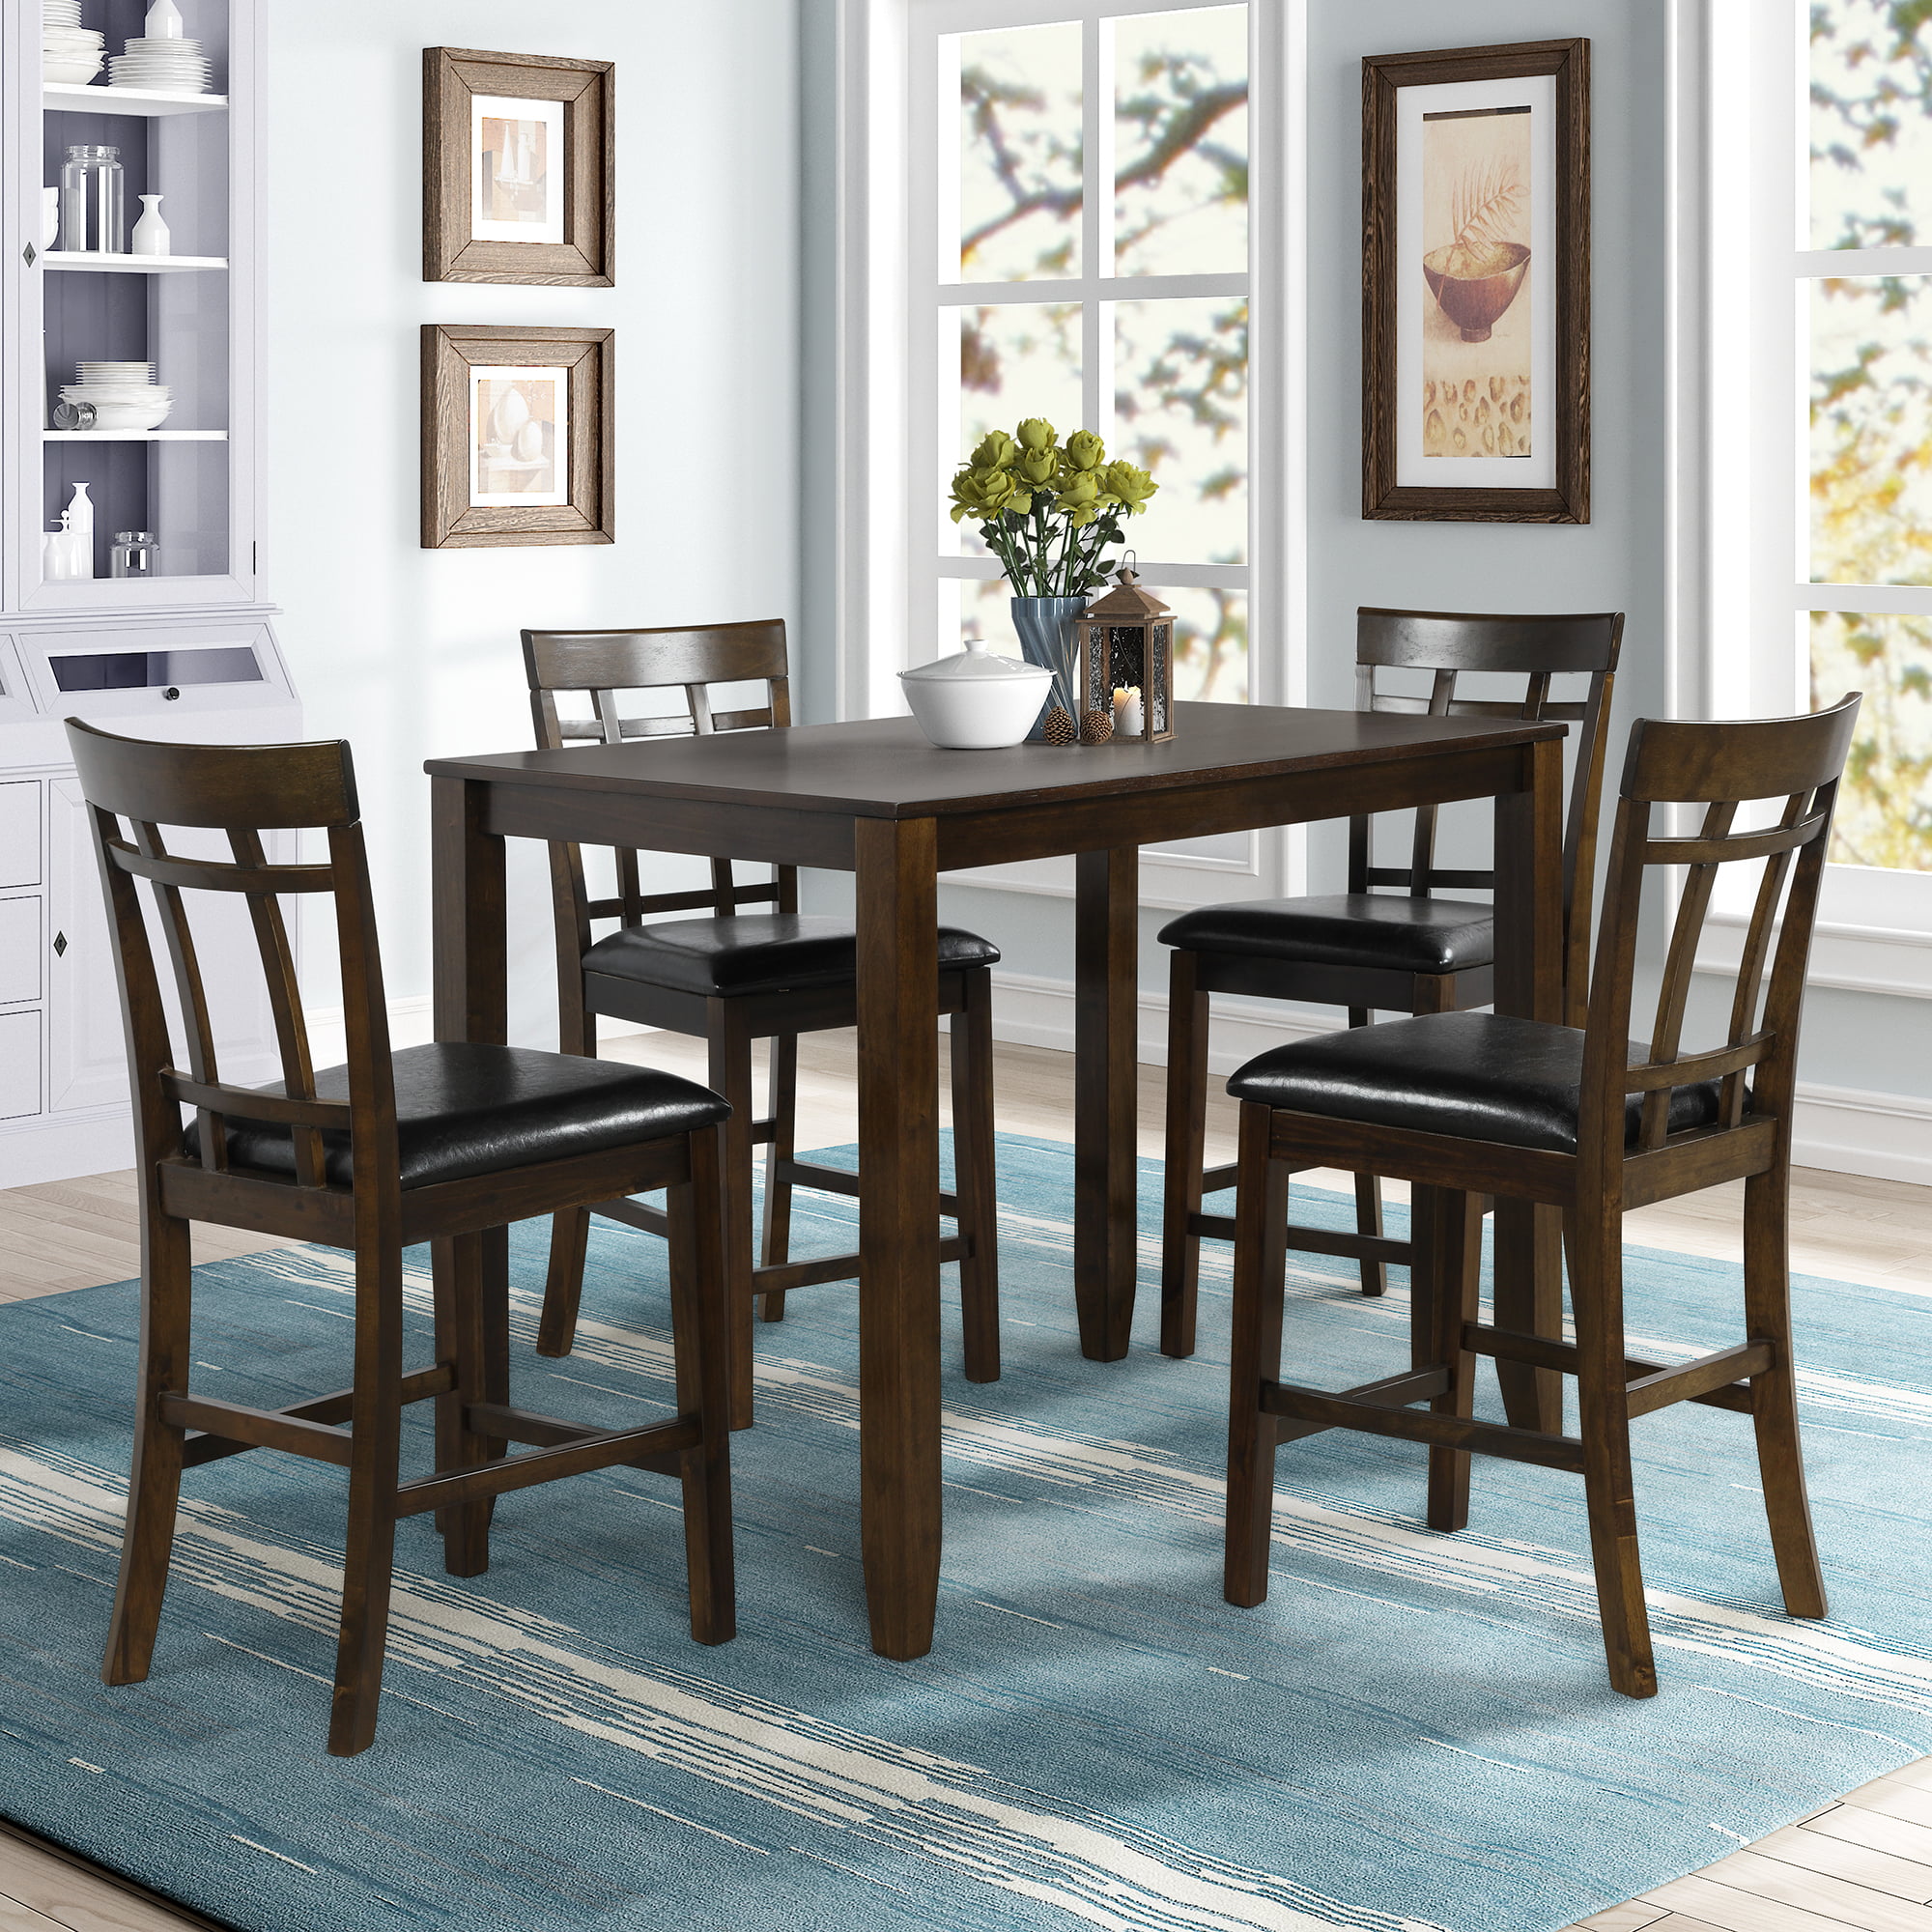 Clearance! 5-Piece Counter Height Dining Set, Wooden Dining Table Sets